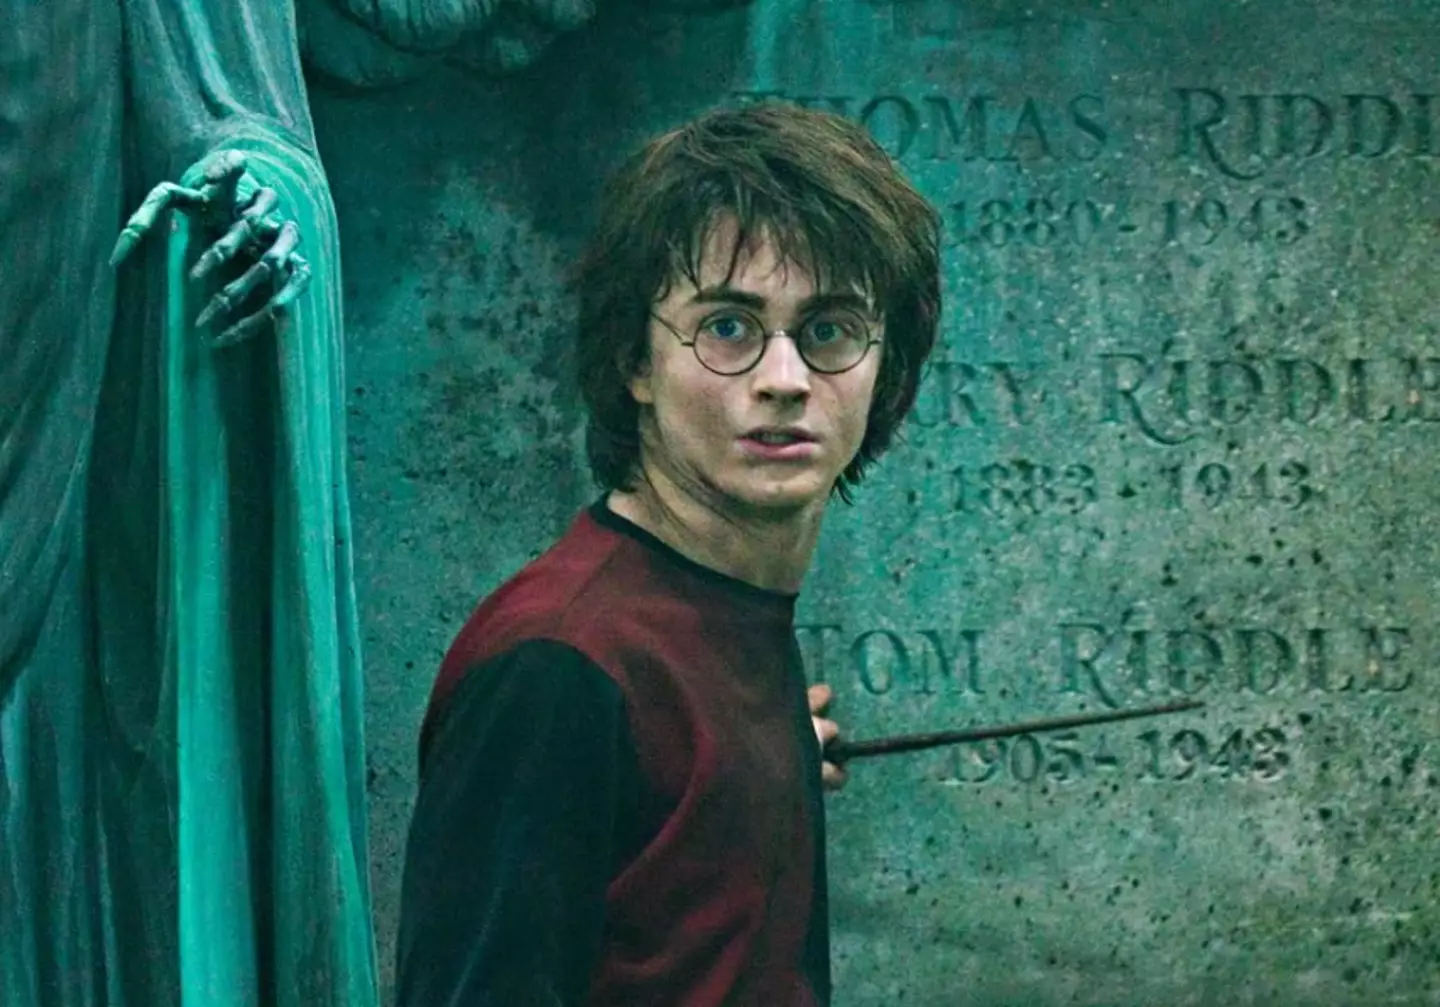 Daniel Radcliffe admitted his life would be different without JK Rowling. (Warner Bros.)